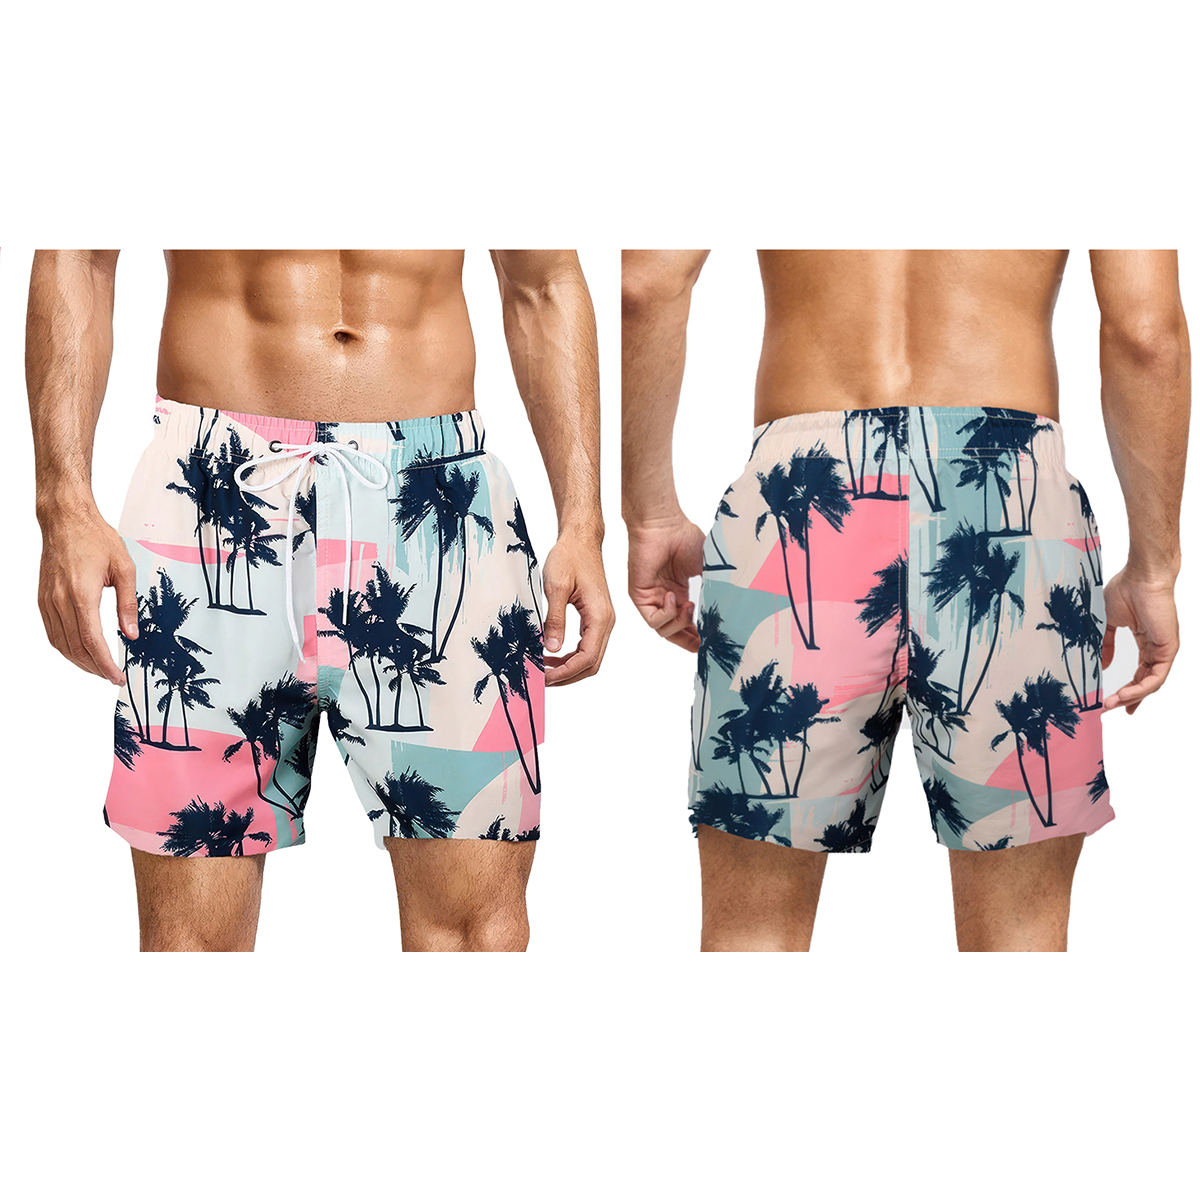 3-Pack: Men's Quick-Dry Solid & Printed Summer Beach Surf Board Swim Trunks Shorts - Small, Printed